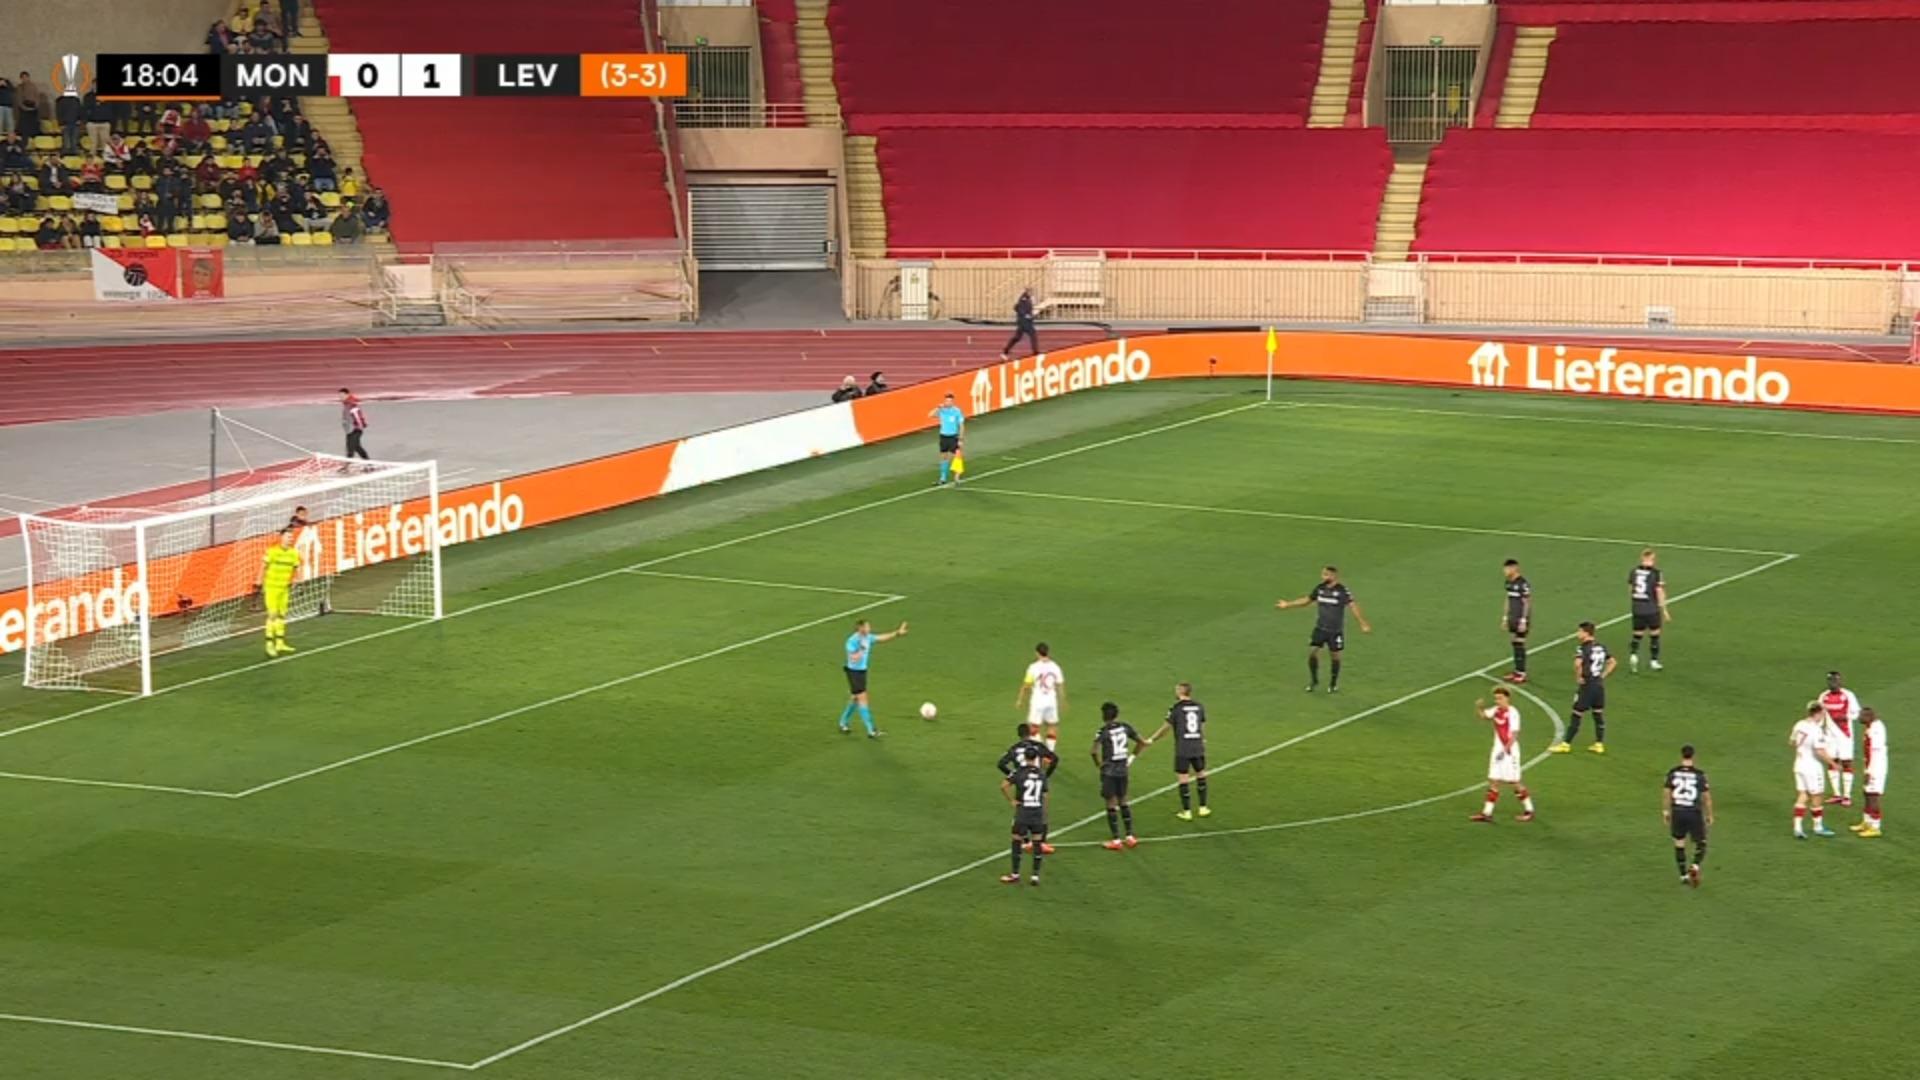 From the point the 1-1 for Monaco Ben Yedder equalizes